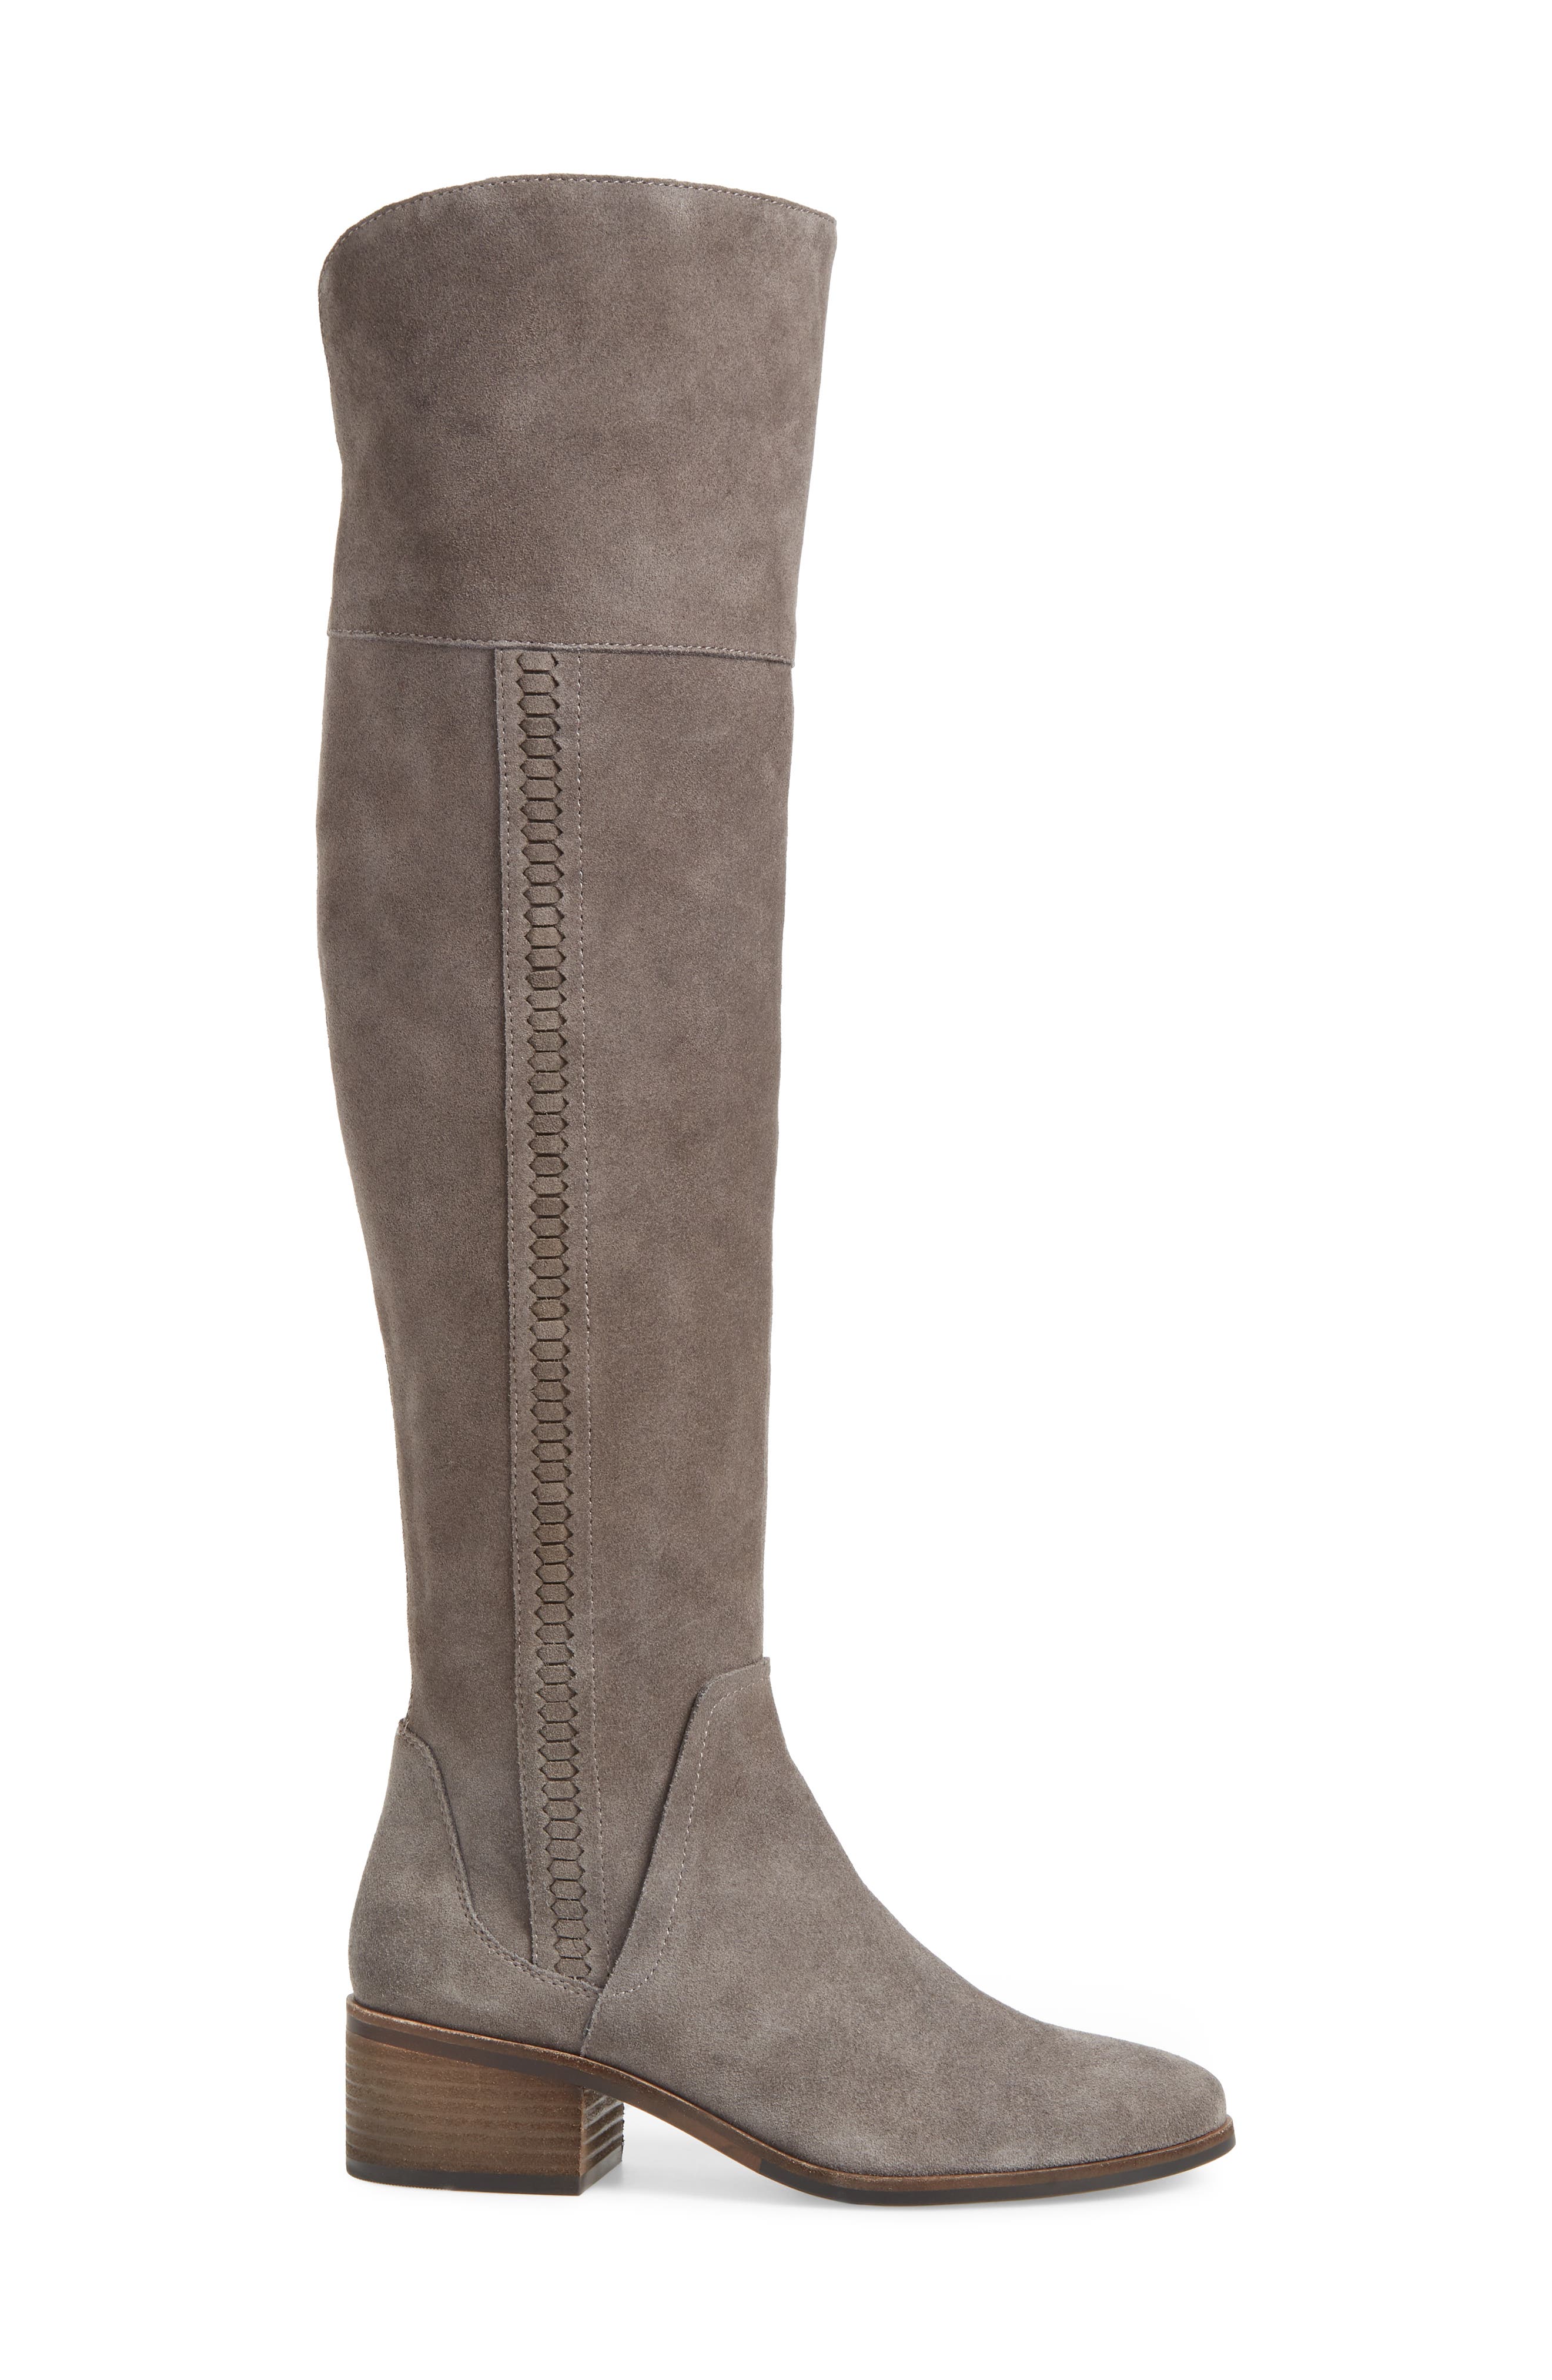 vince camuto wide calf boots size 10